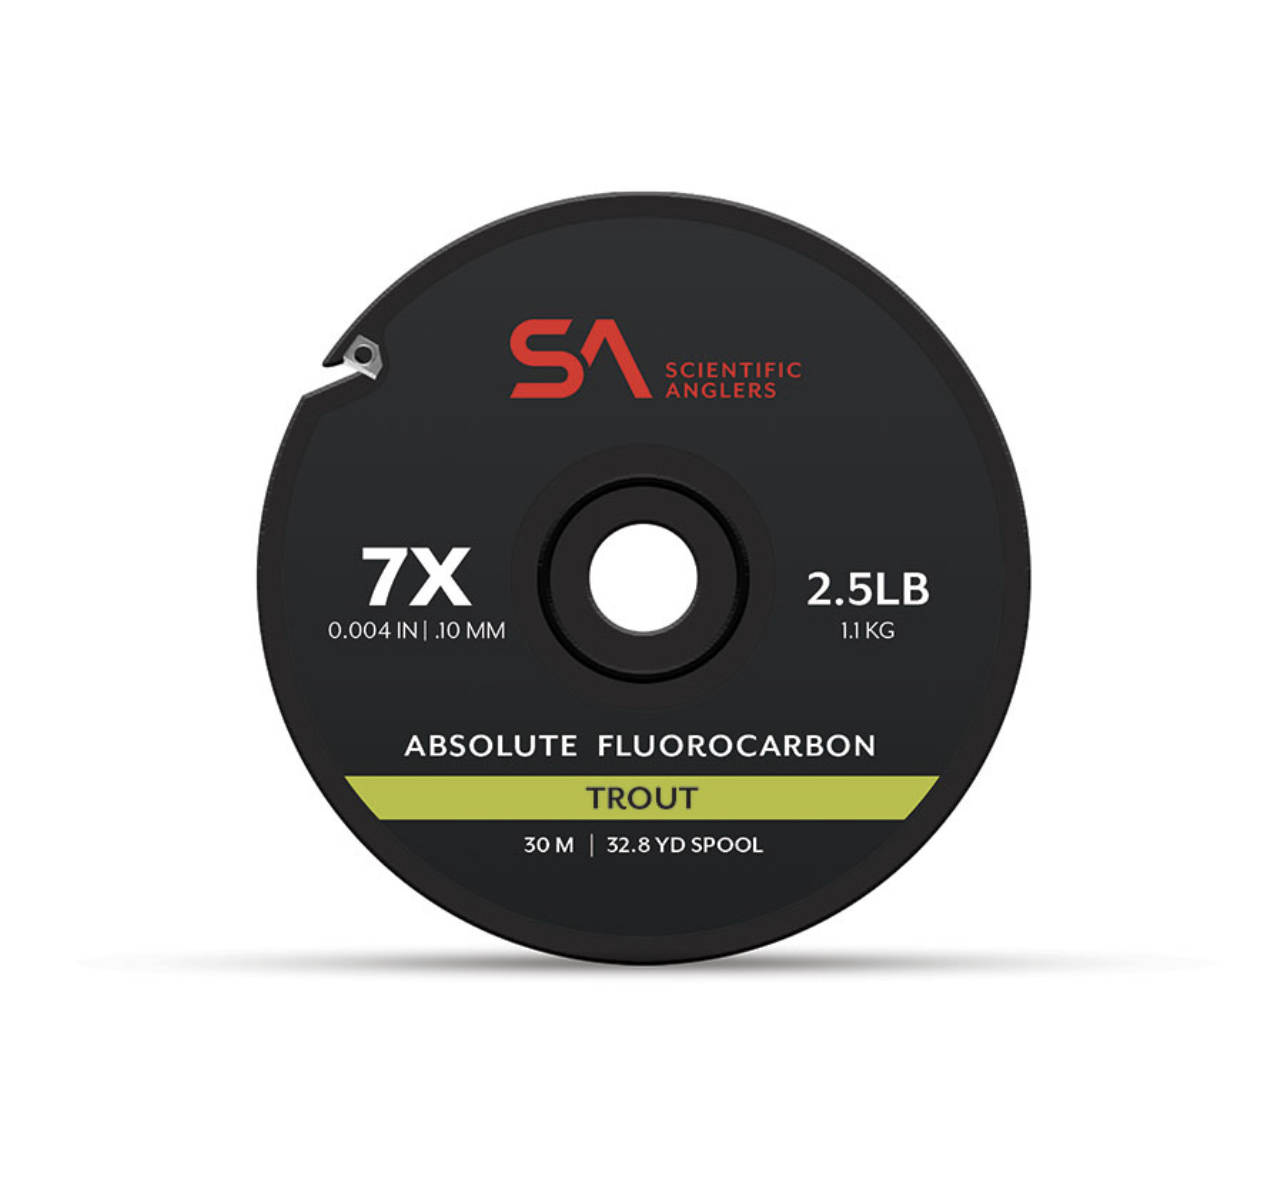 Scientific Anglers Absolute Fluorocarbon Trout Tippet - 30m - 5X - 4.6lb